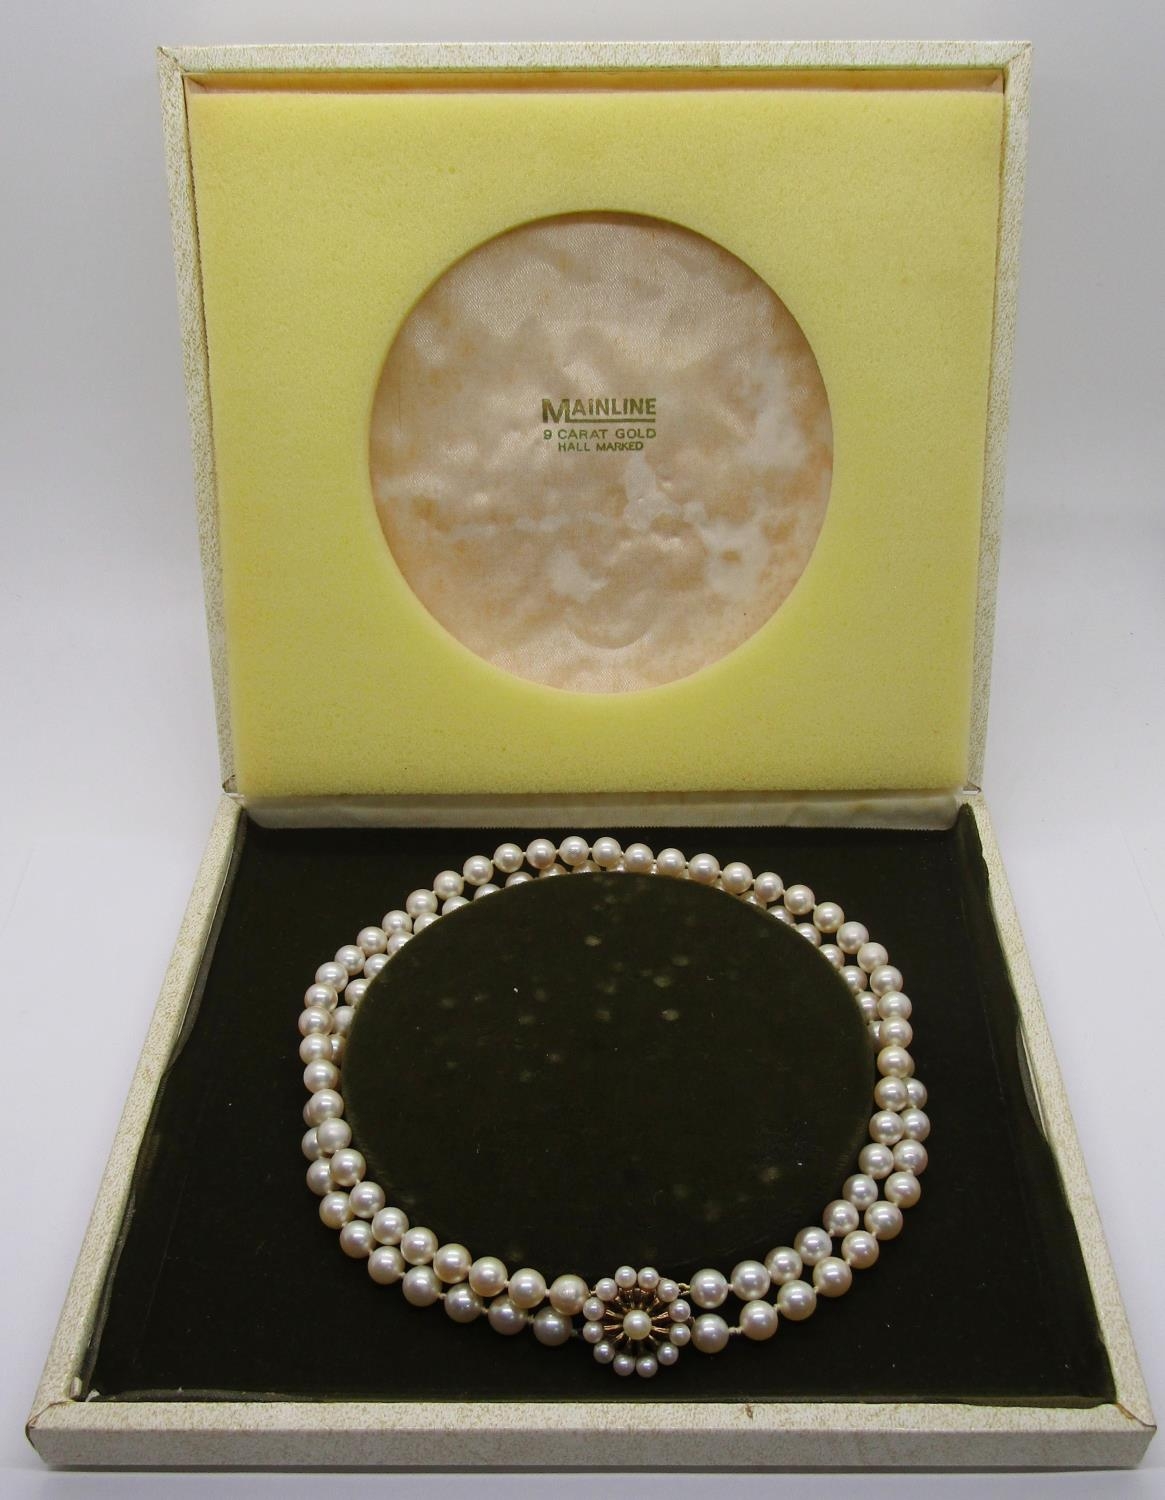 Double strand pearl choker necklace with 9ct pearl cluster clasp (see photograph of 2018 insurance